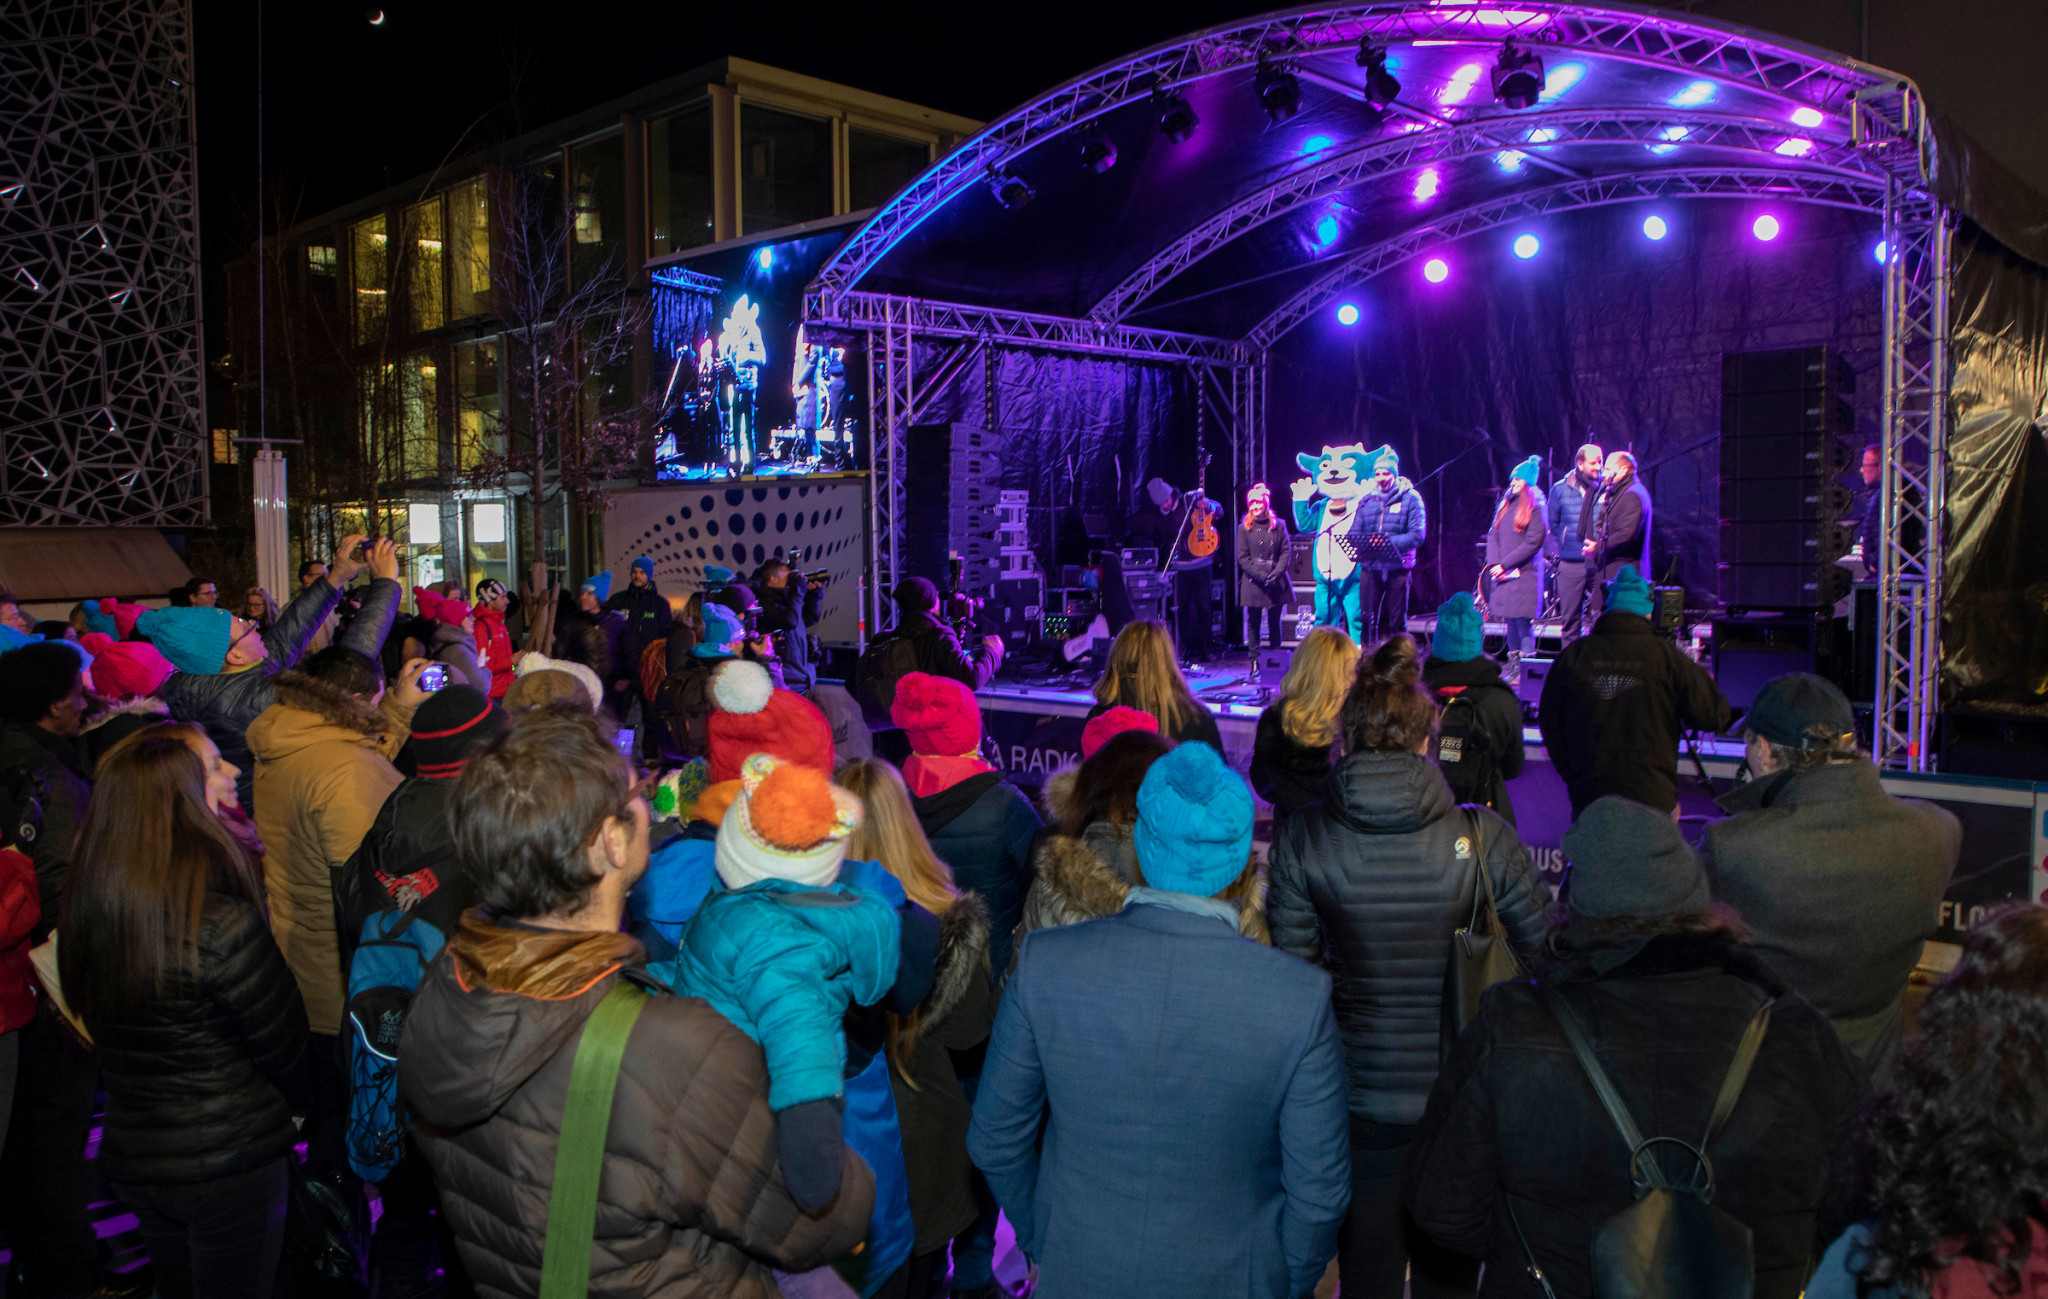 Lausanne 2020 held a celebratory concert to mark the one year to go milestone on the proposed Winter Youth Olympic medal plaza ©IOC